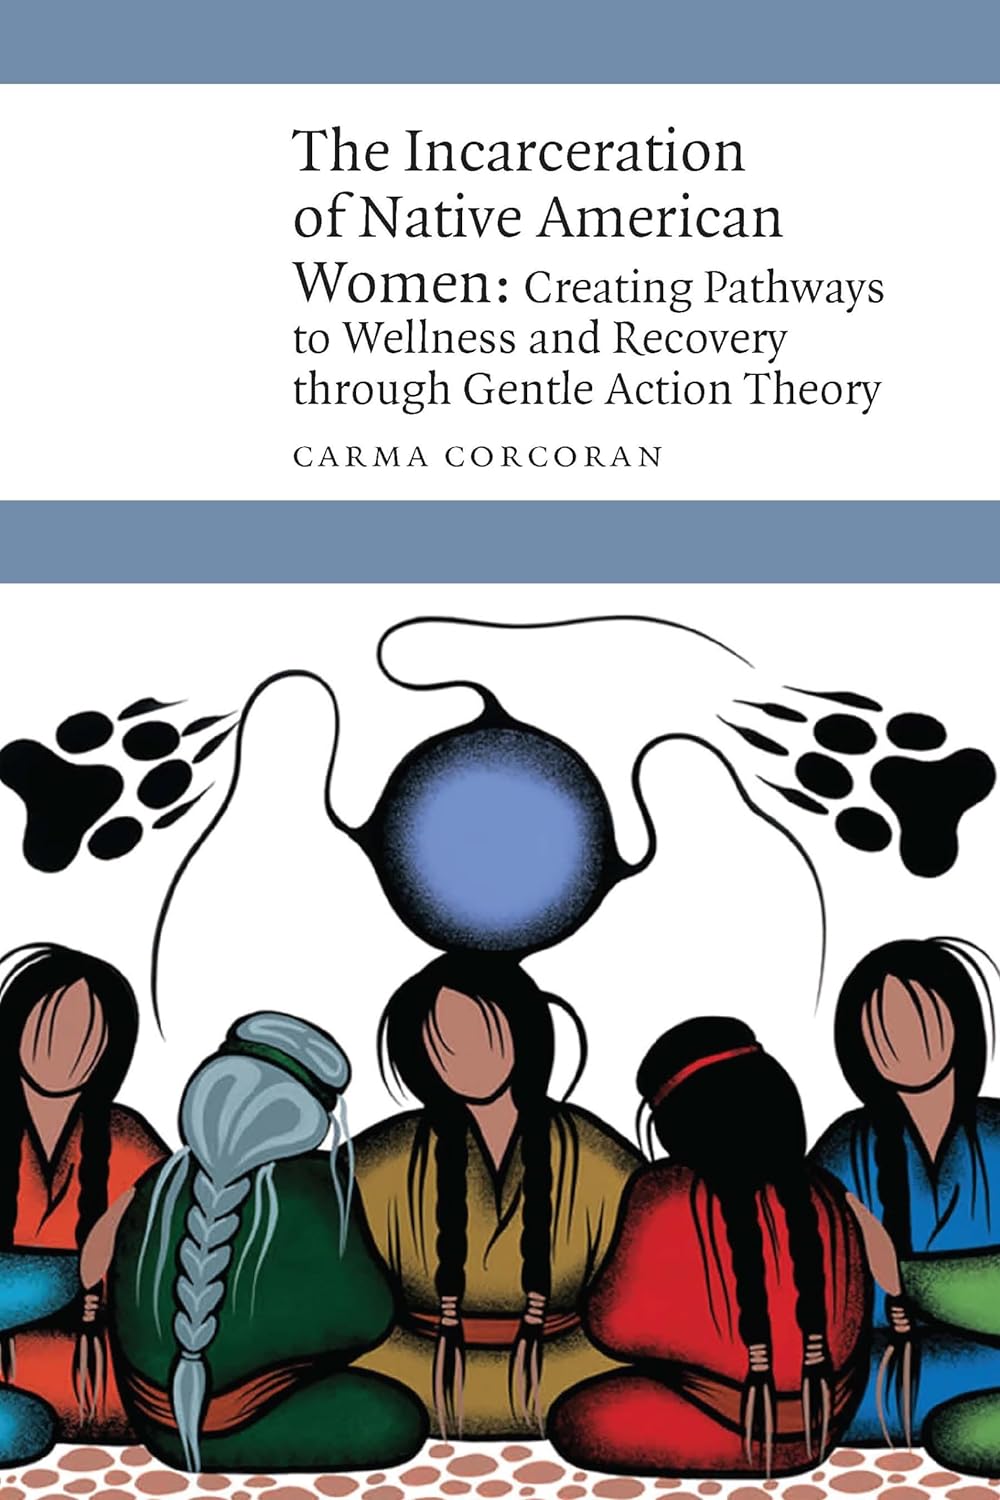 The Incarceration of Native American Women: Creating Pathways to Wellness and Recovery through Gentle Action Theory by Carma Corcoran